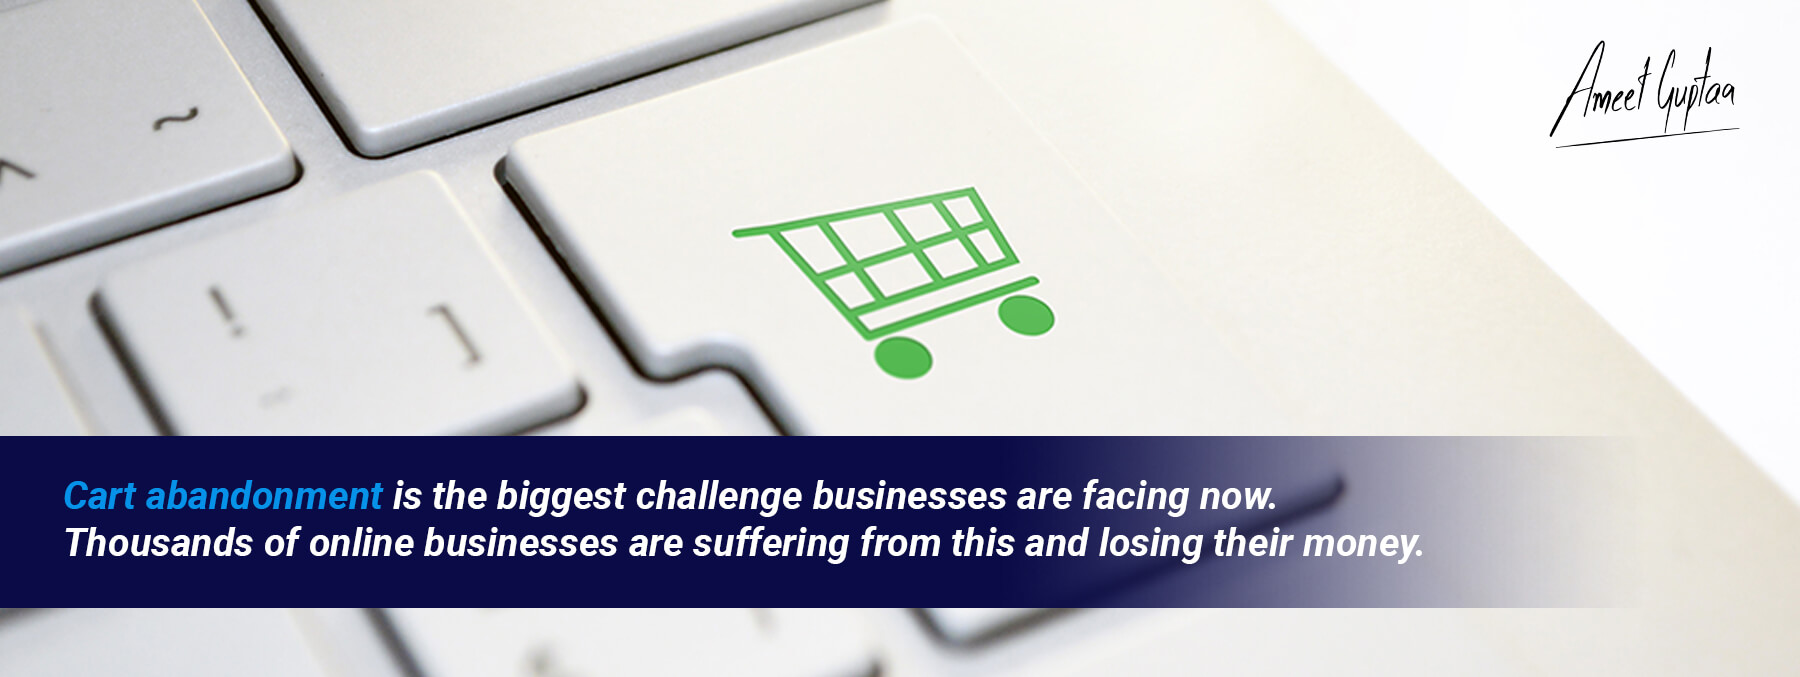 Top 5 Reasons Your Ecommerce Website Visitor Are Abandoning Orders